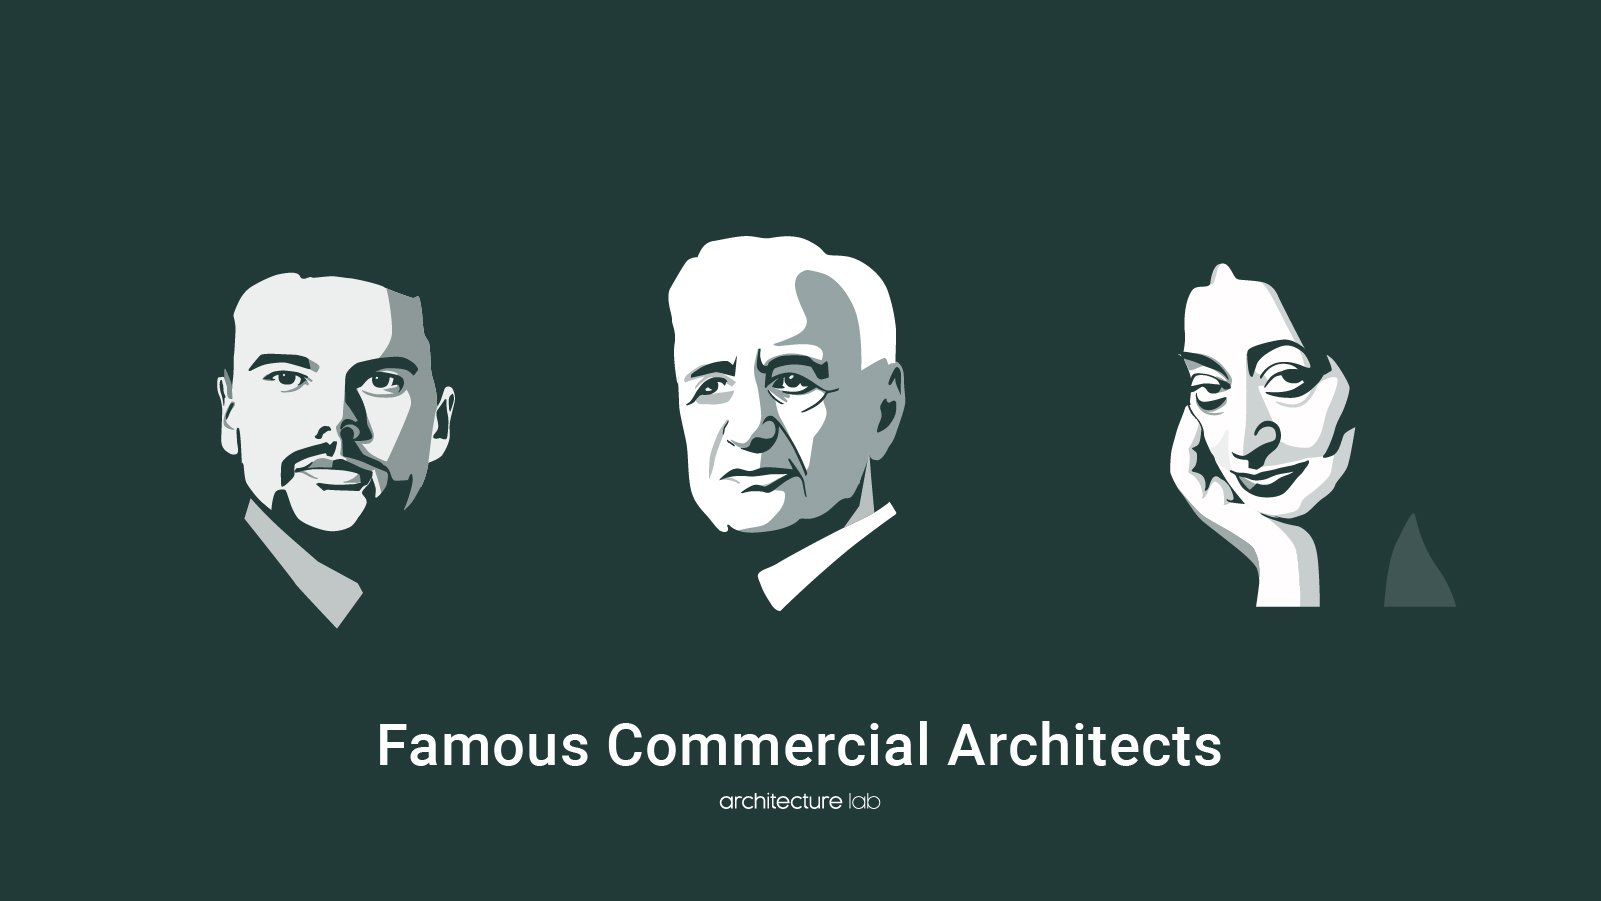 18 famous commercial architects and their proud works